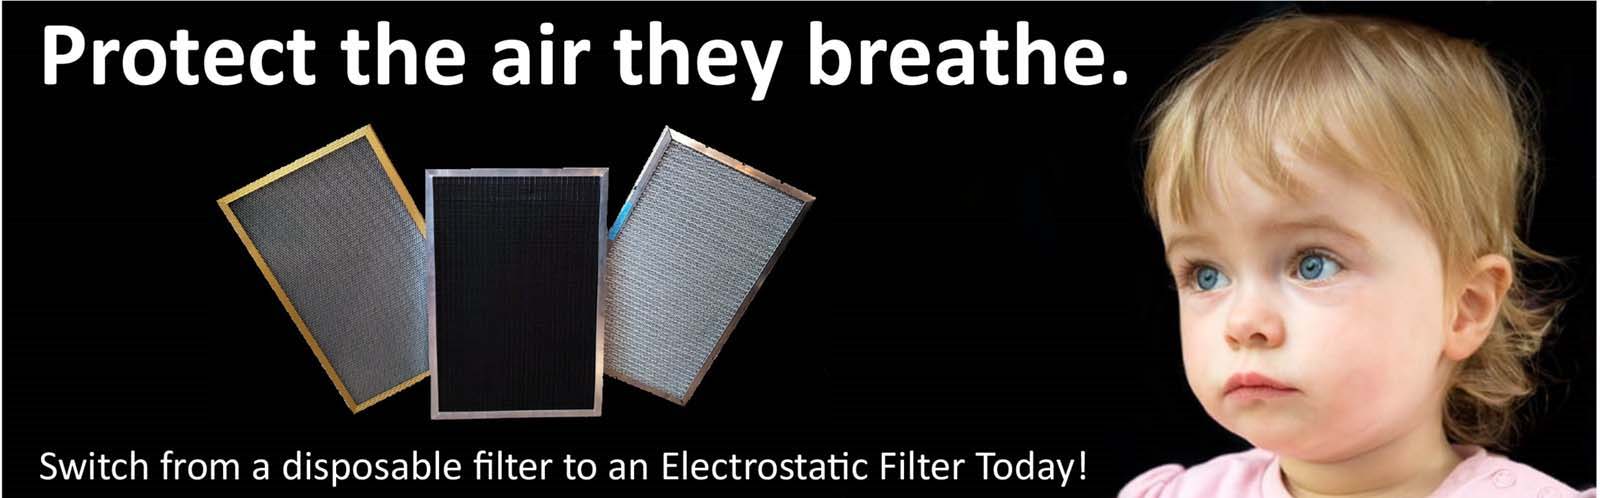 Switch from a disposable to an electrostatic filter today.